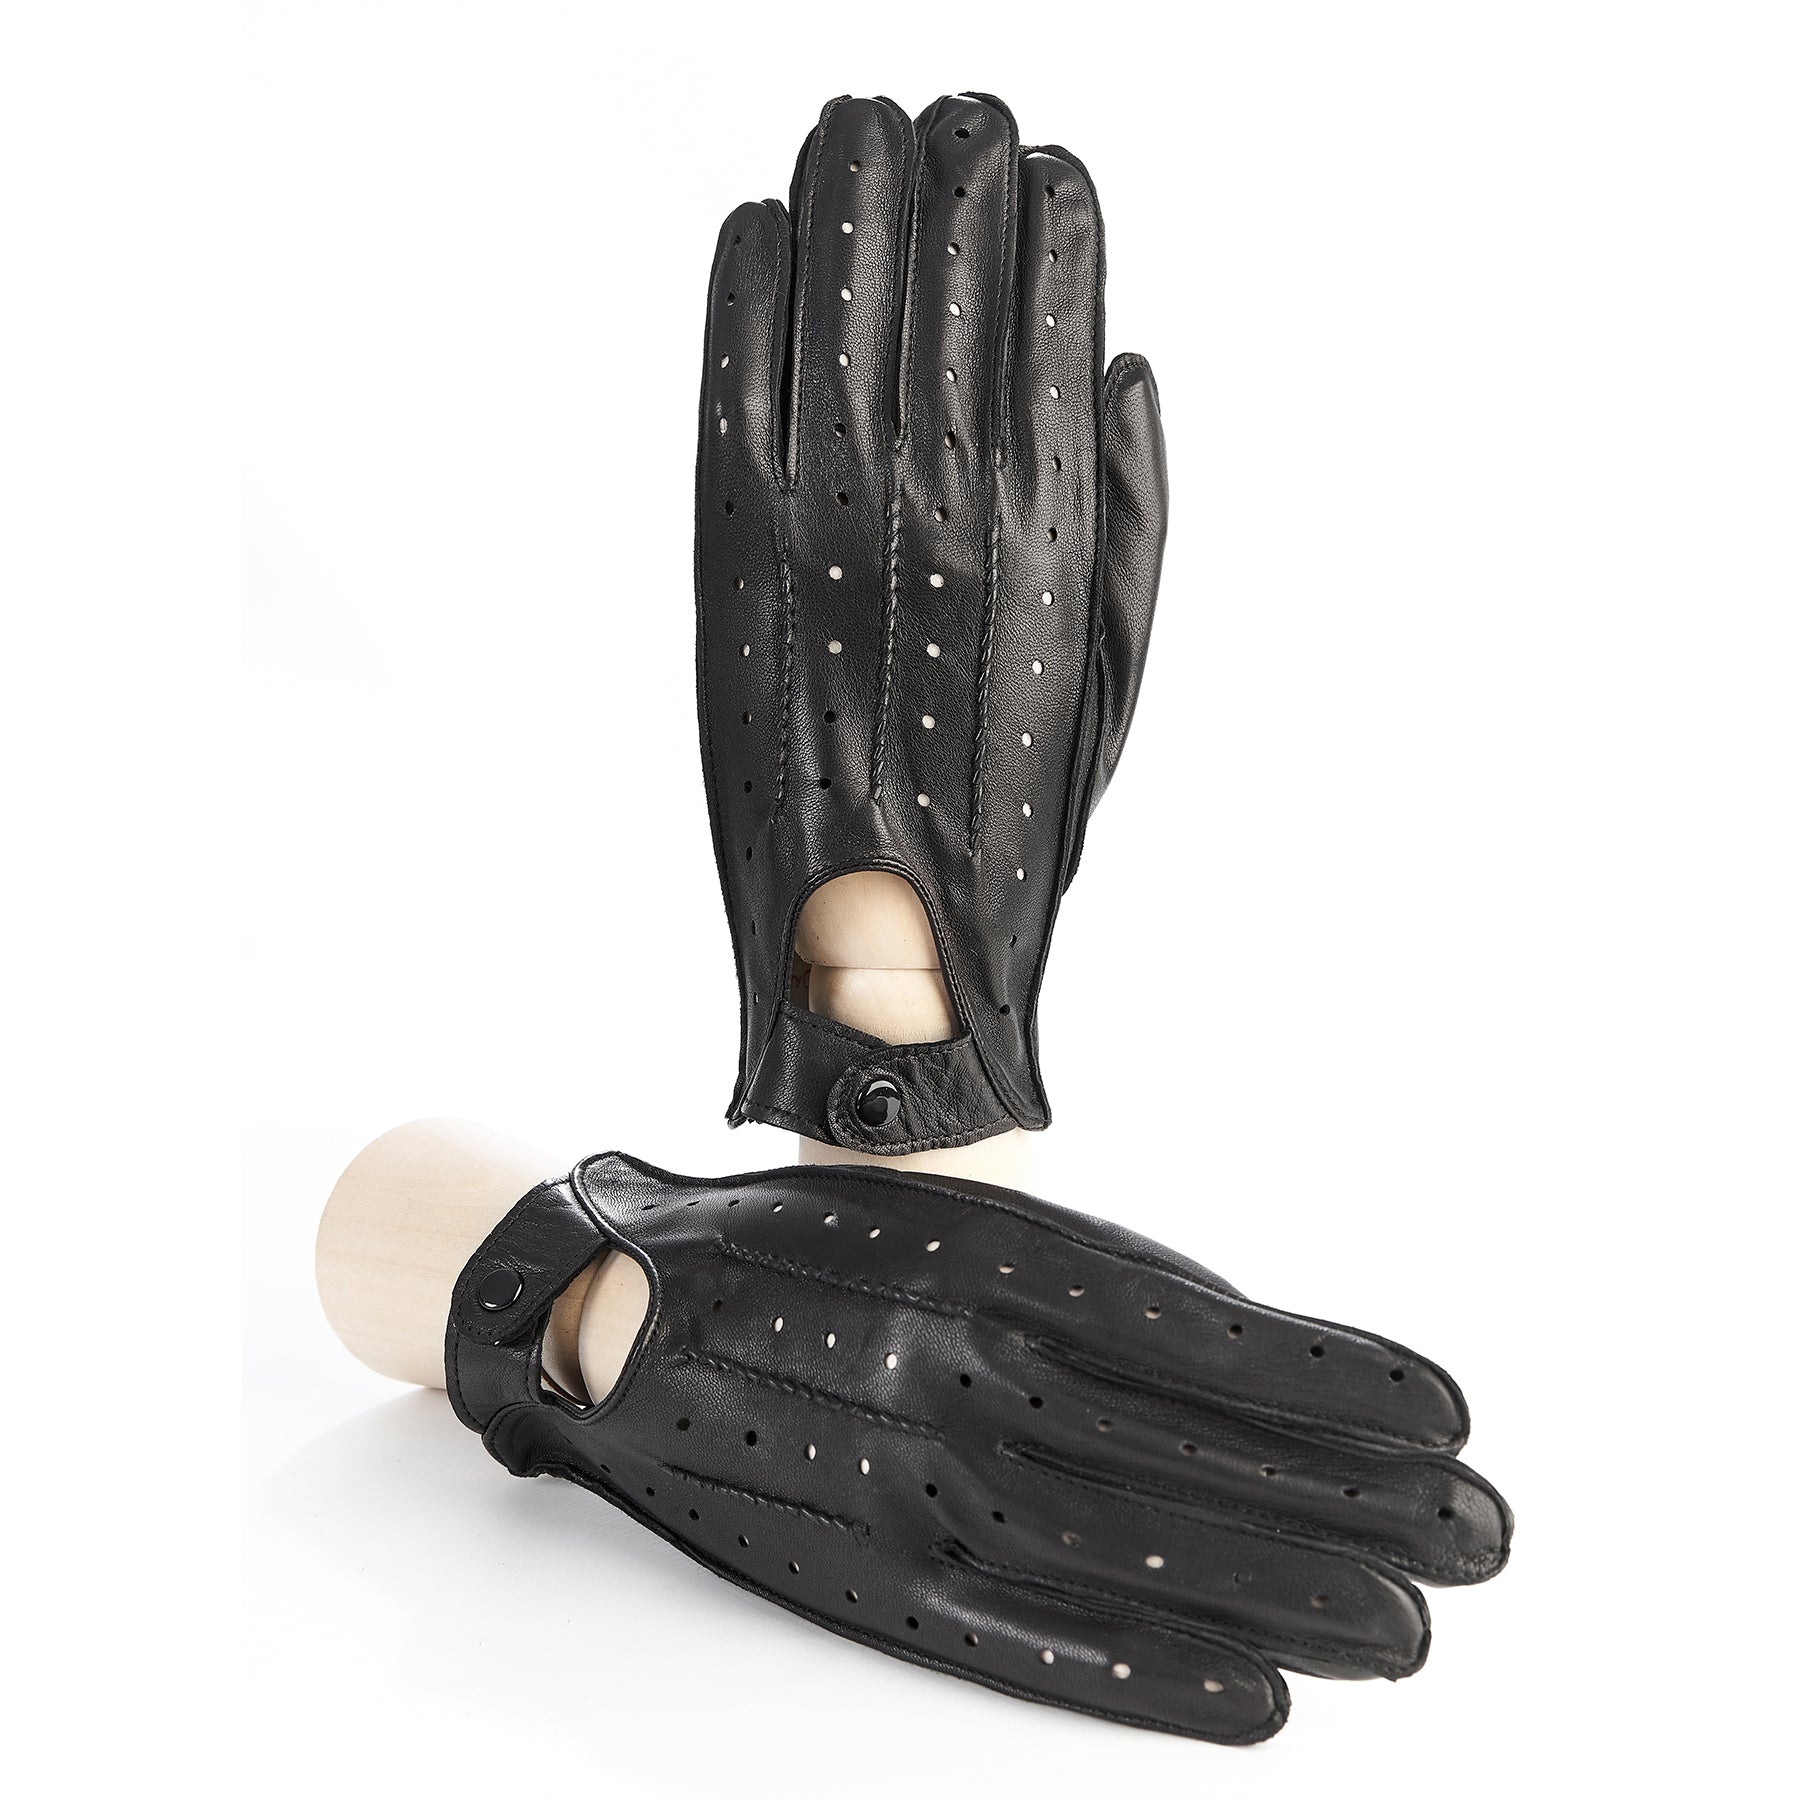 Men's unlined black leather driving gloves with button closure